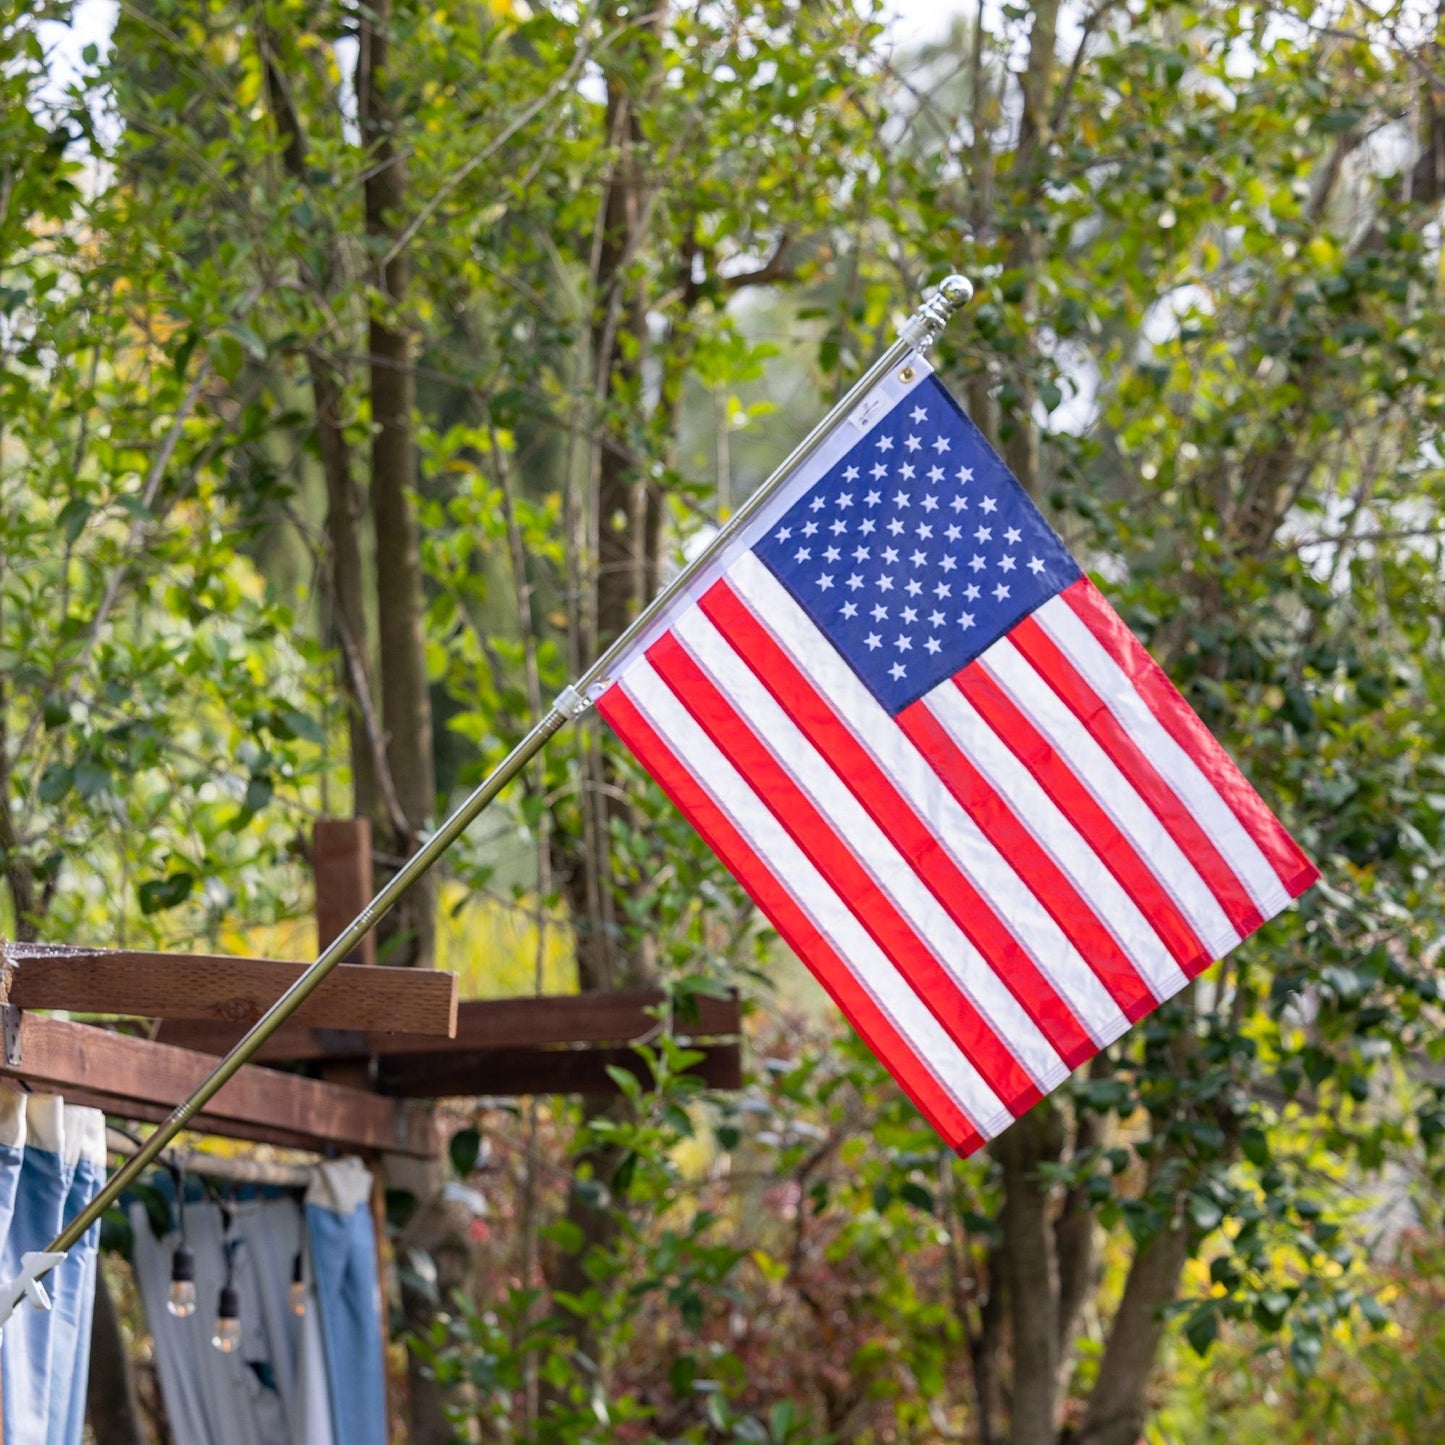 A The FlagStars 2' X 3' AMERICAN FLAG on a pole waves outdoors with greenery and trees in the background, promising long-lasting pride.